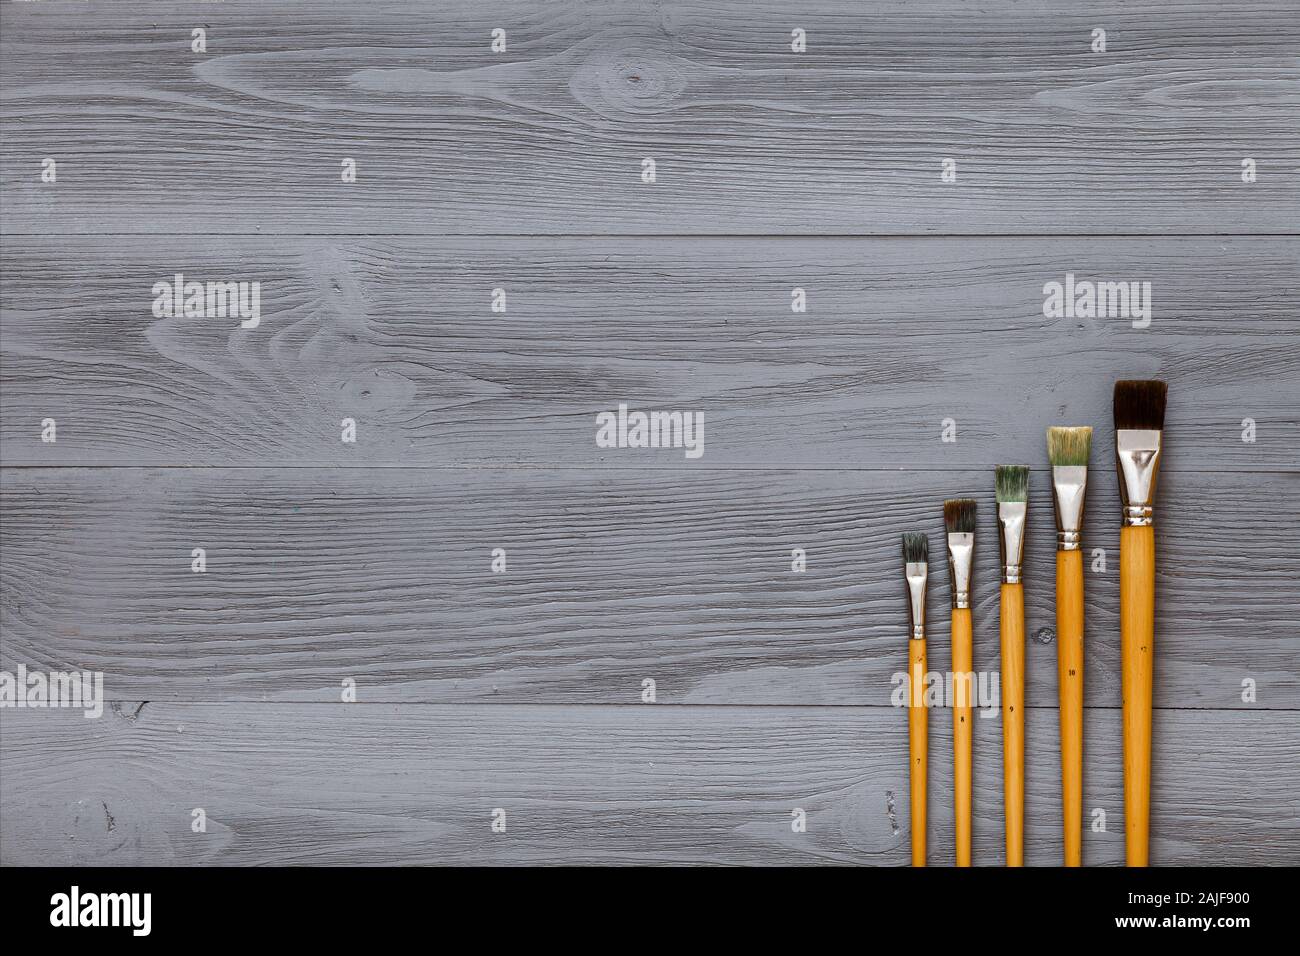 Paint brushes set on grey wooden table, artistic gray background Stock Photo